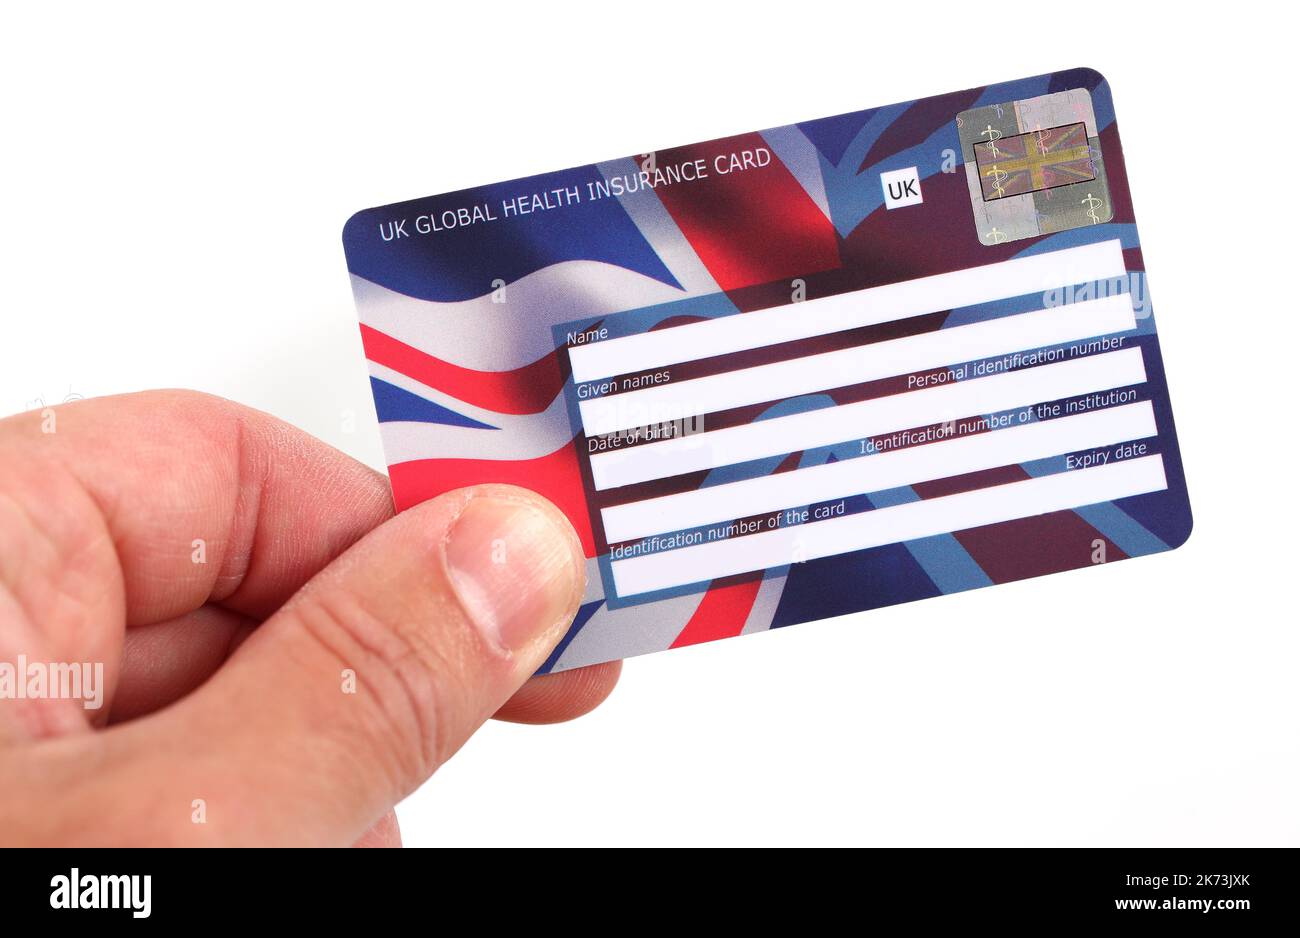 UK Global Health Insurance Card also known as a GHIC card. Stock Photo